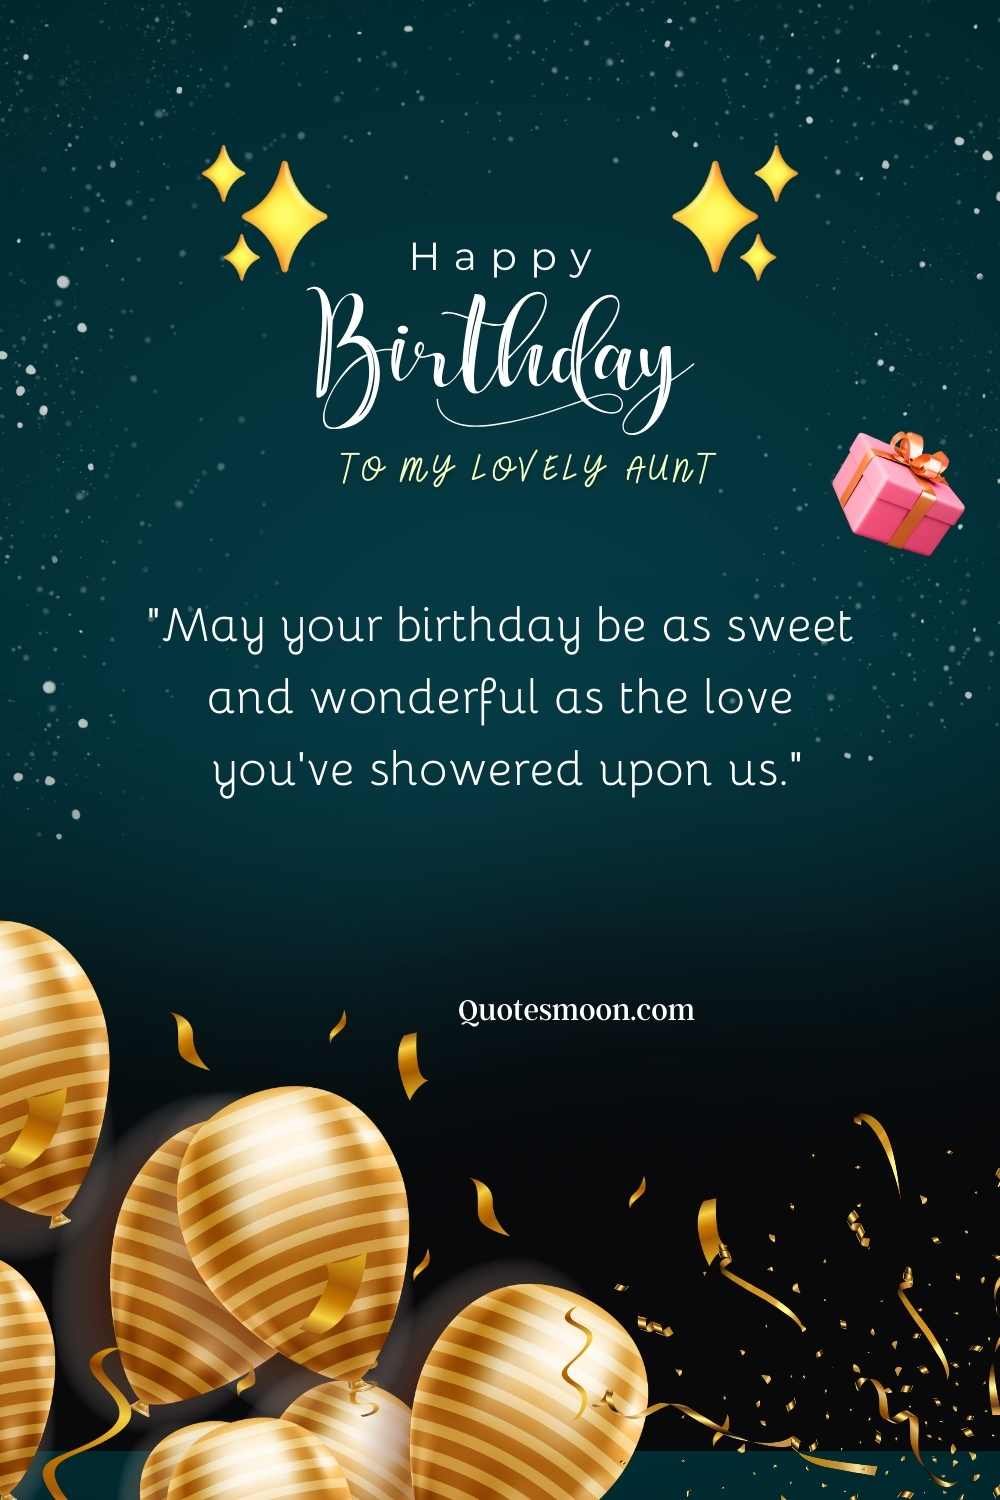 Inspirational Birthday Message For Aunt with images HD